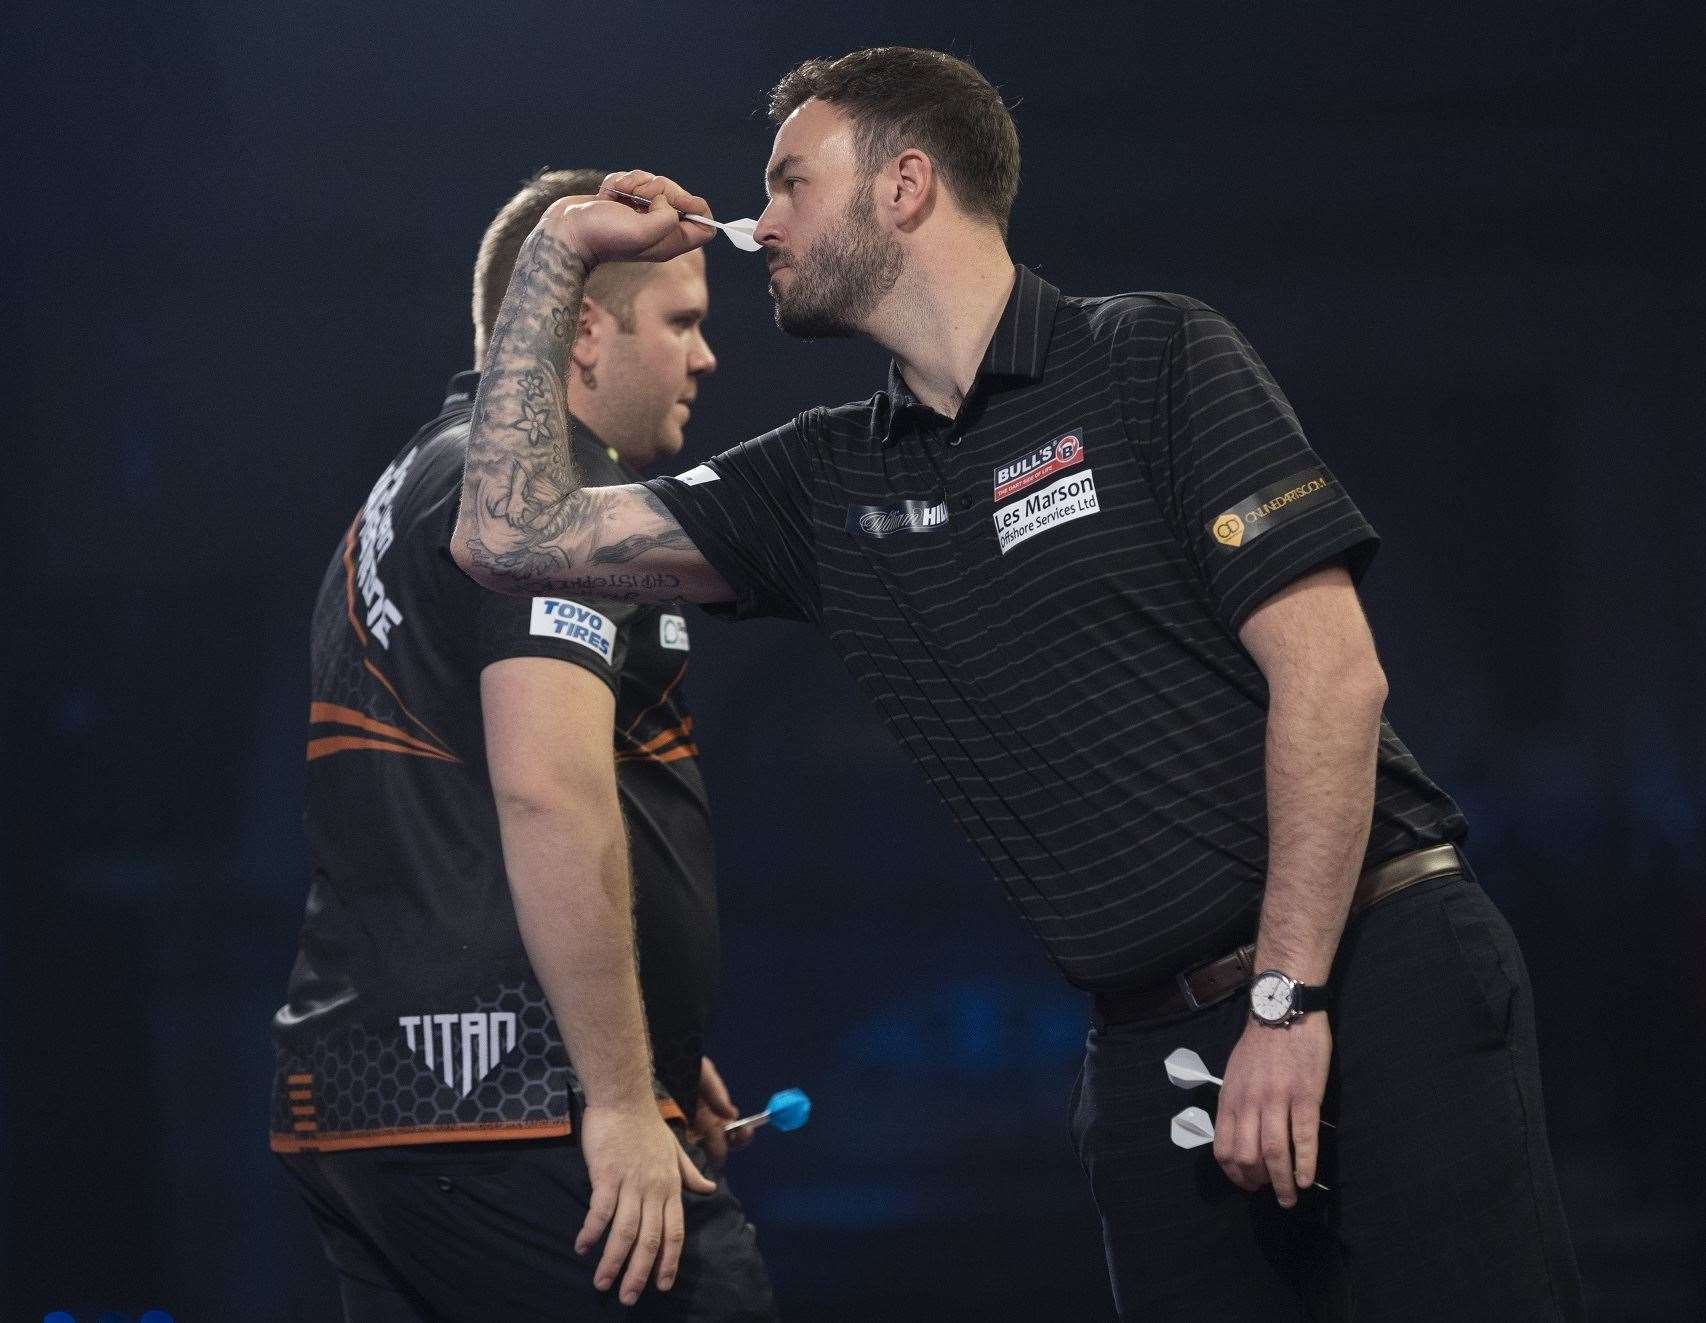 Deal's Ross Smith has moved into the top 16 in the world. Picture: Lawrence Lustig/PDC